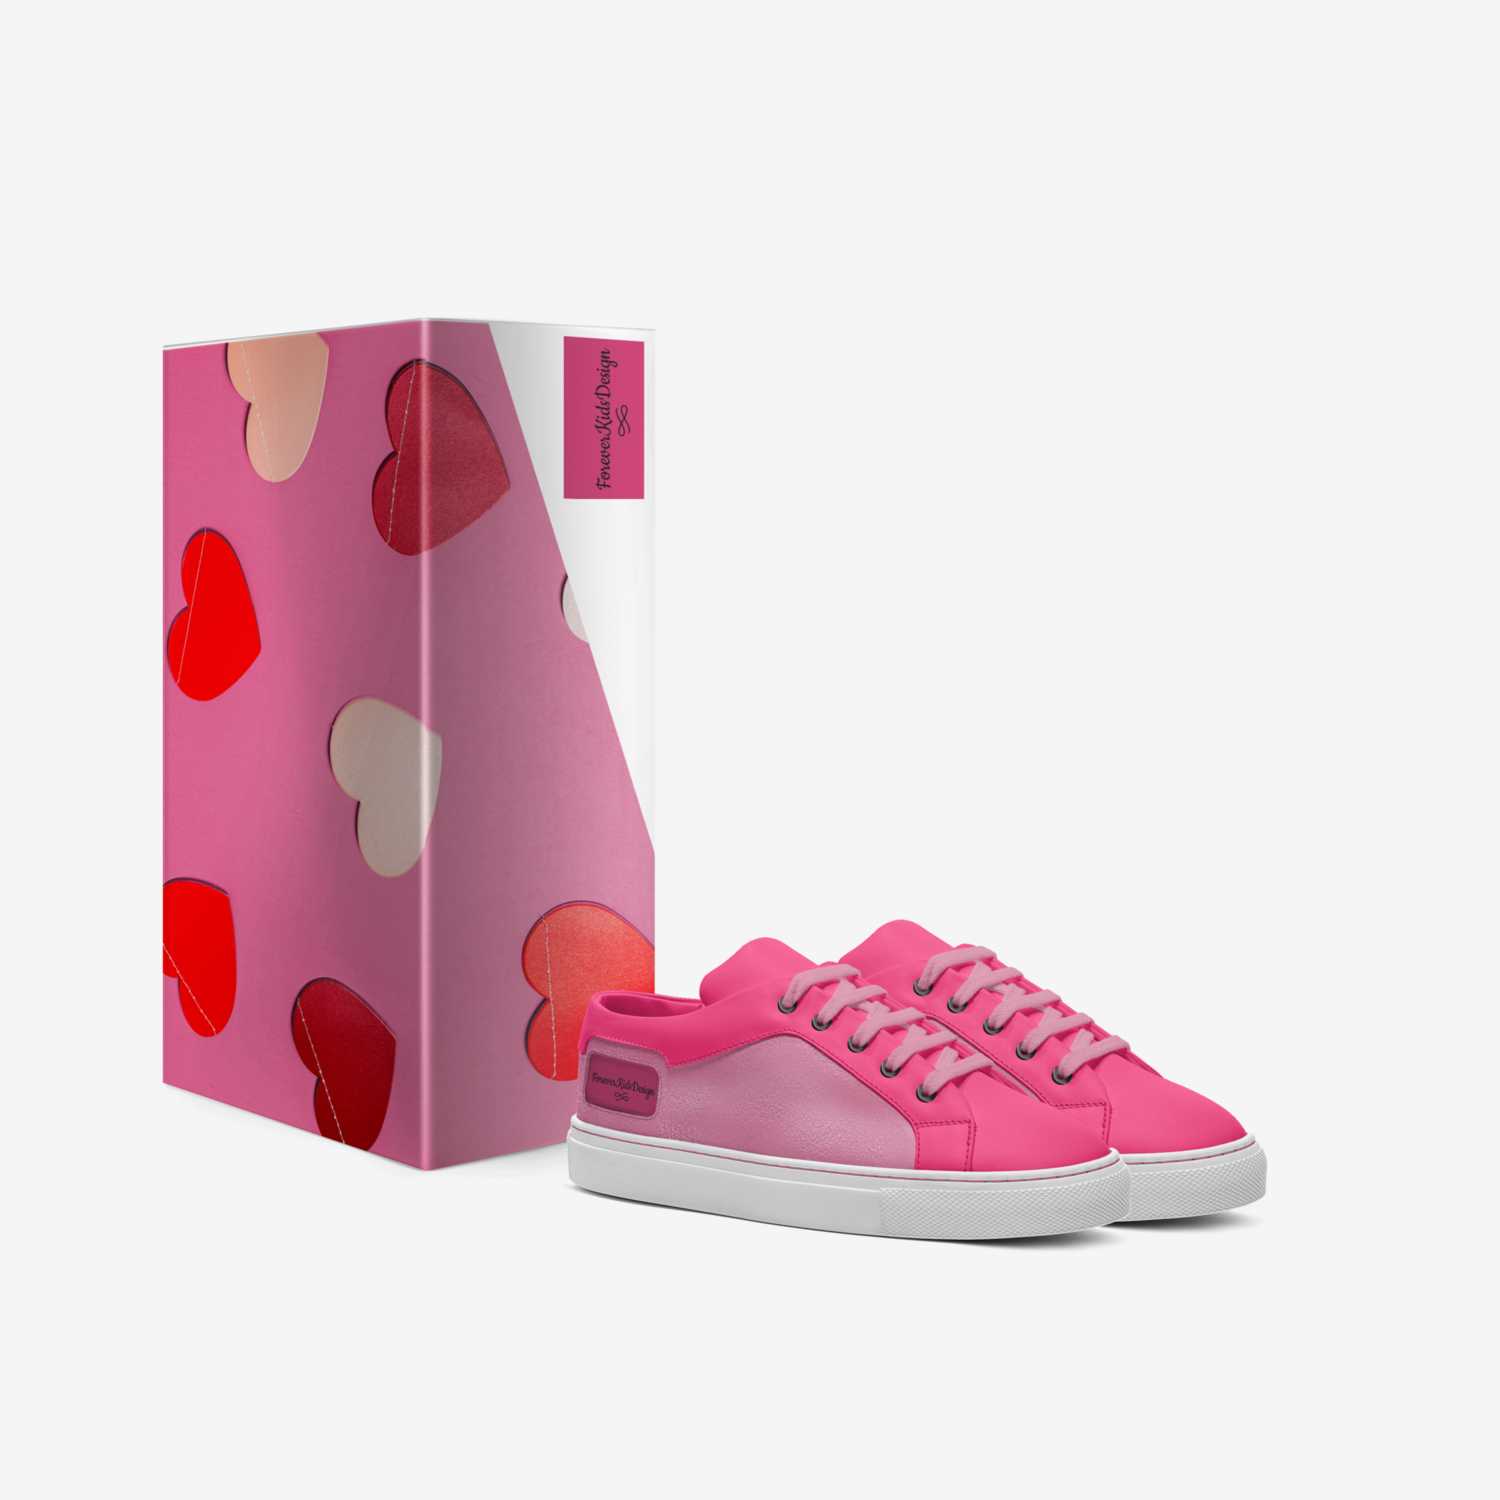 ForeverKidsDesign custom made in Italy shoes by Dr Lillian Carter | Box view